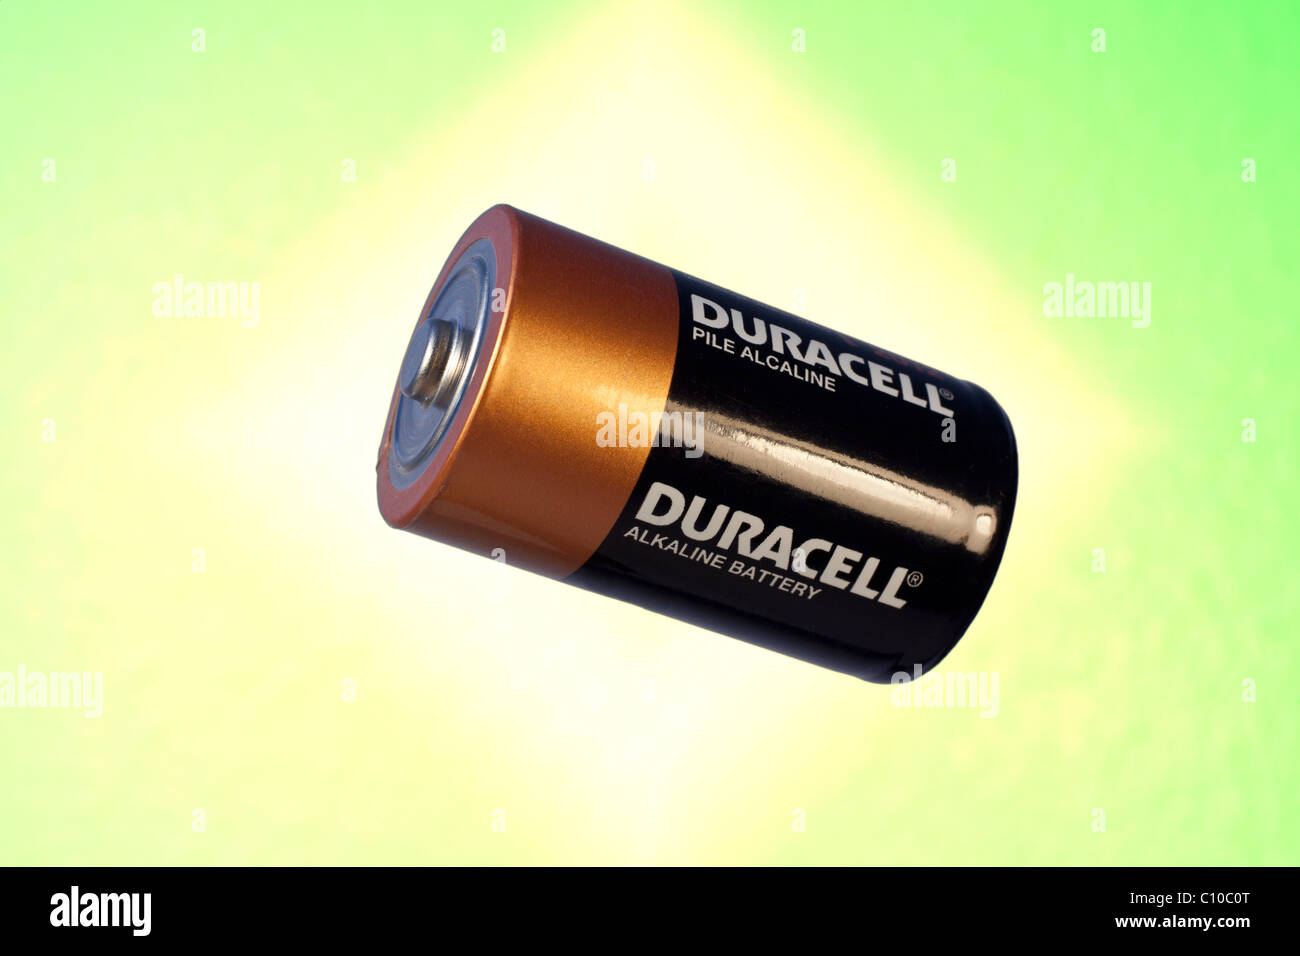 https://c8.alamy.com/comp/C10C0T/a-duracell-size-d-battery-on-colored-background-C10C0T.jpg